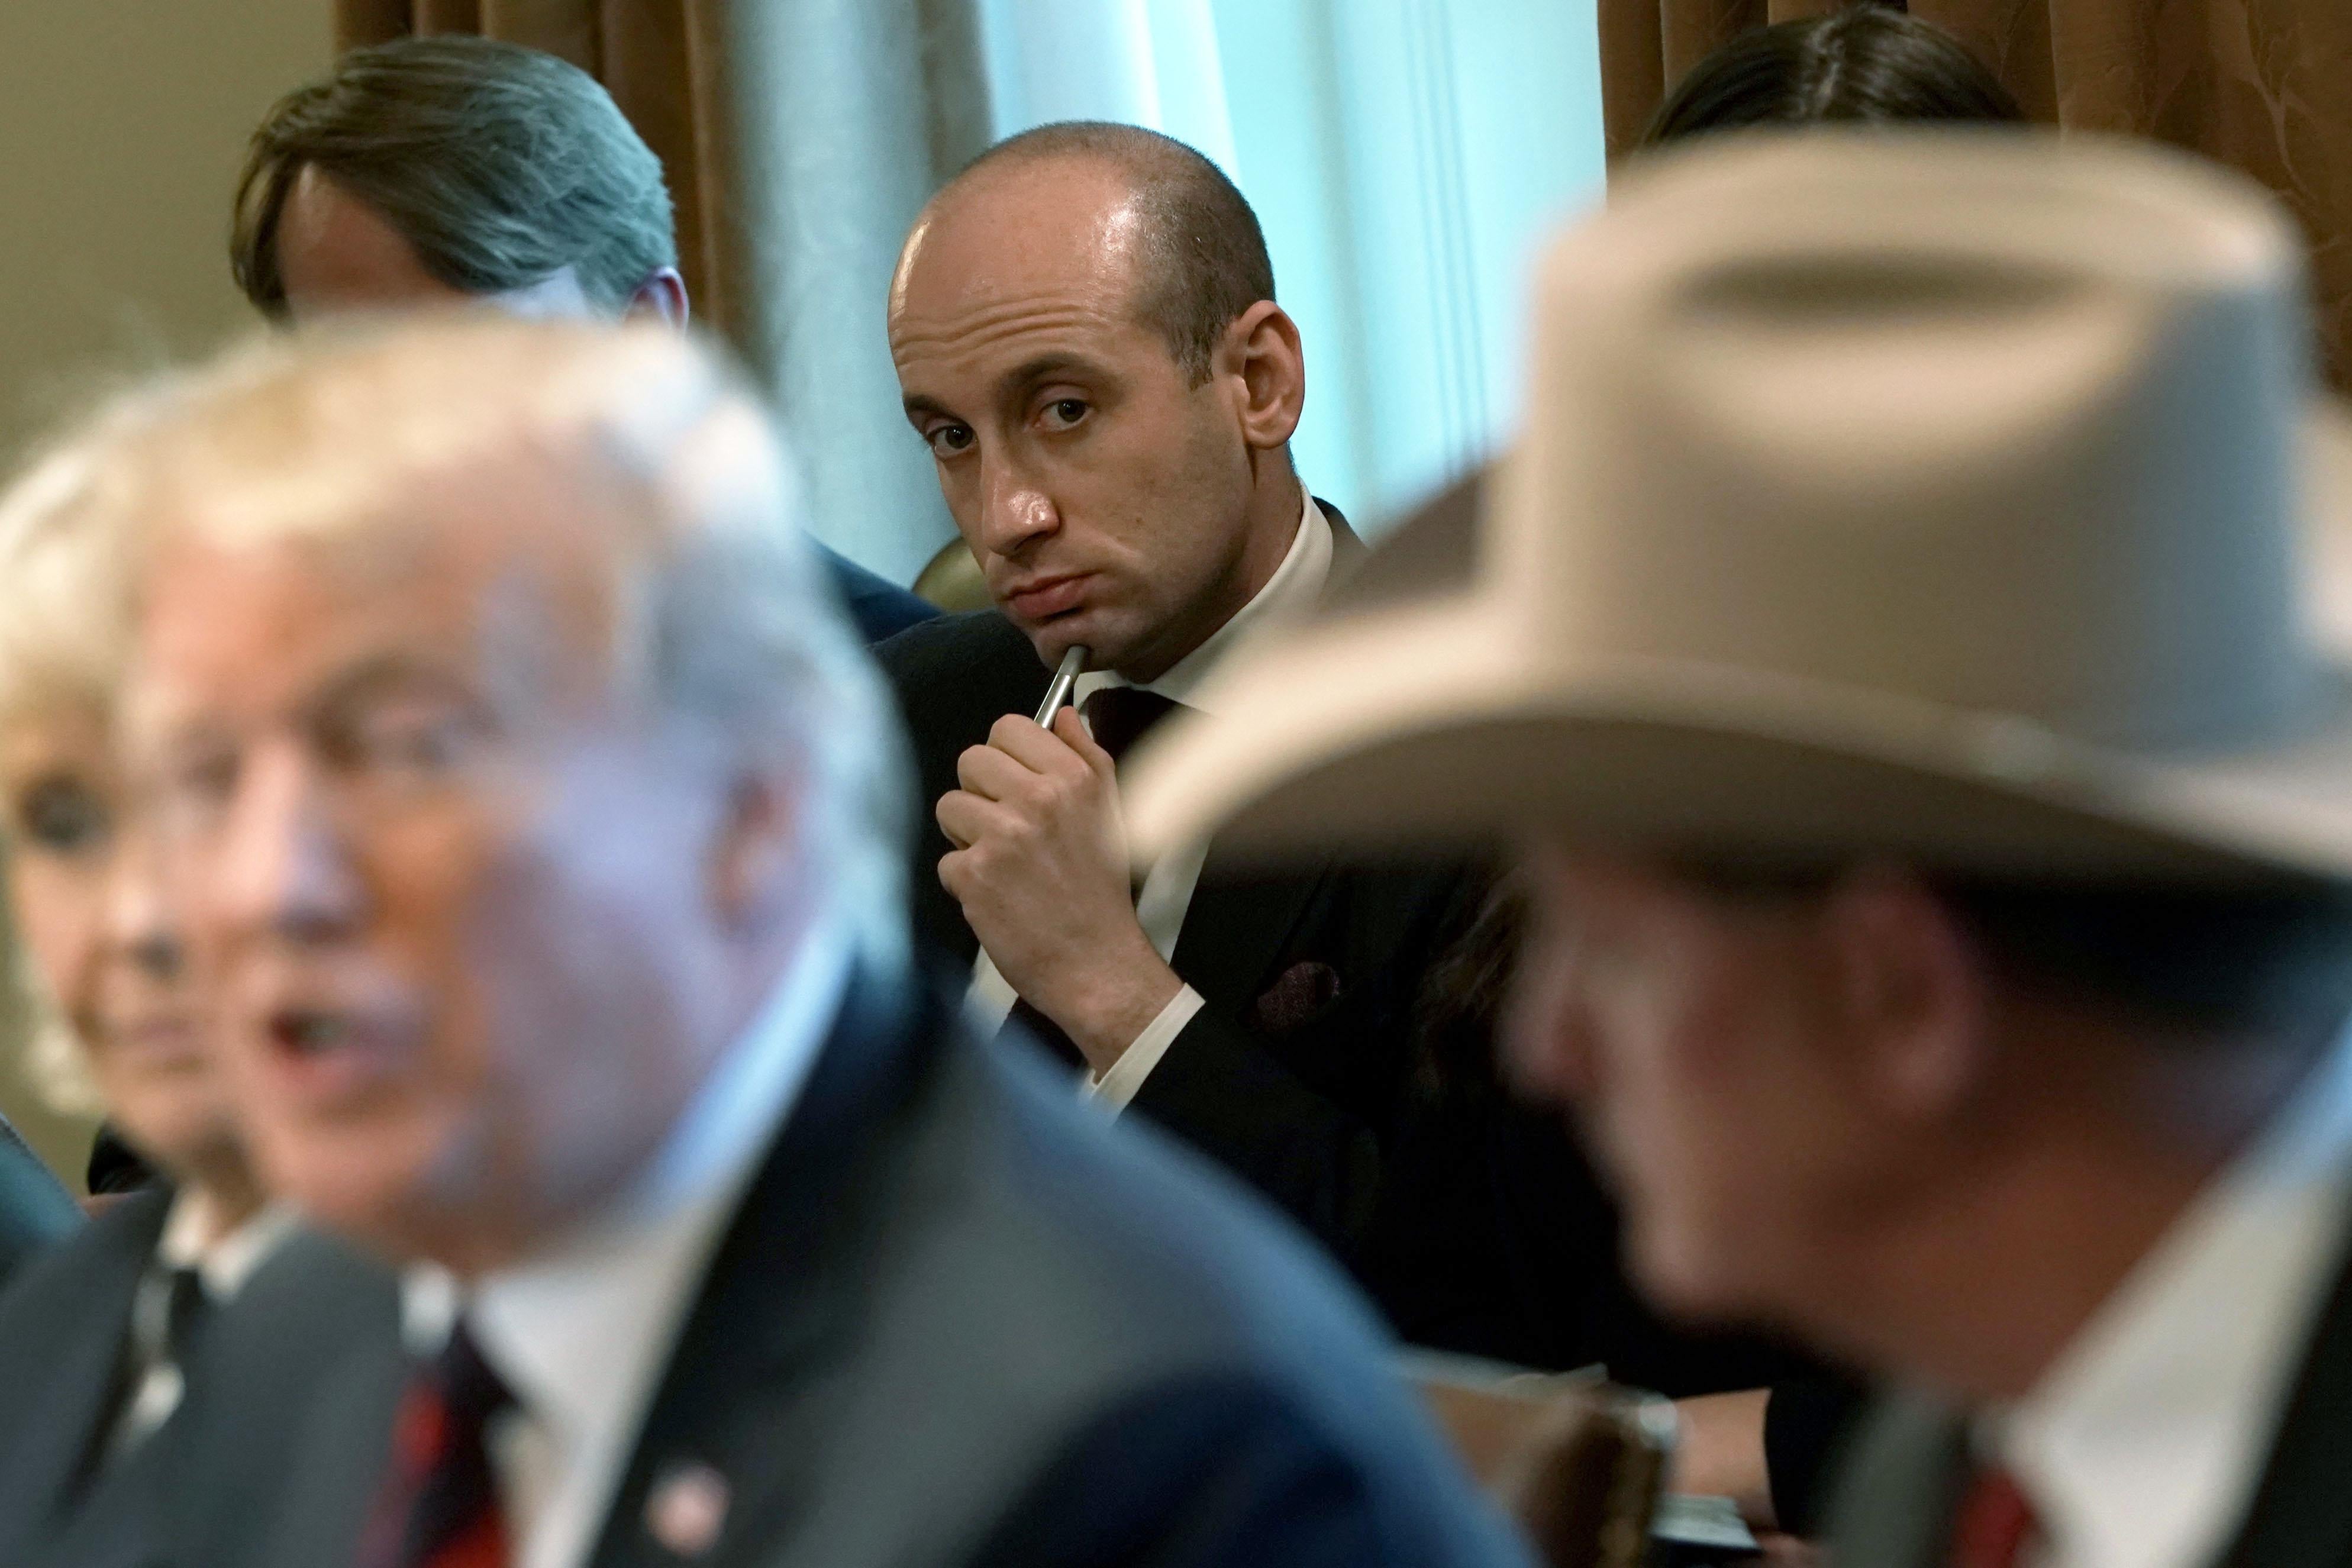 President Donald Trump speaks as senior adviser Stephen Miller (C) listens during a round-table discussion on border security and safe communities at the White House on January 11, 2019 in Washington, D.C.